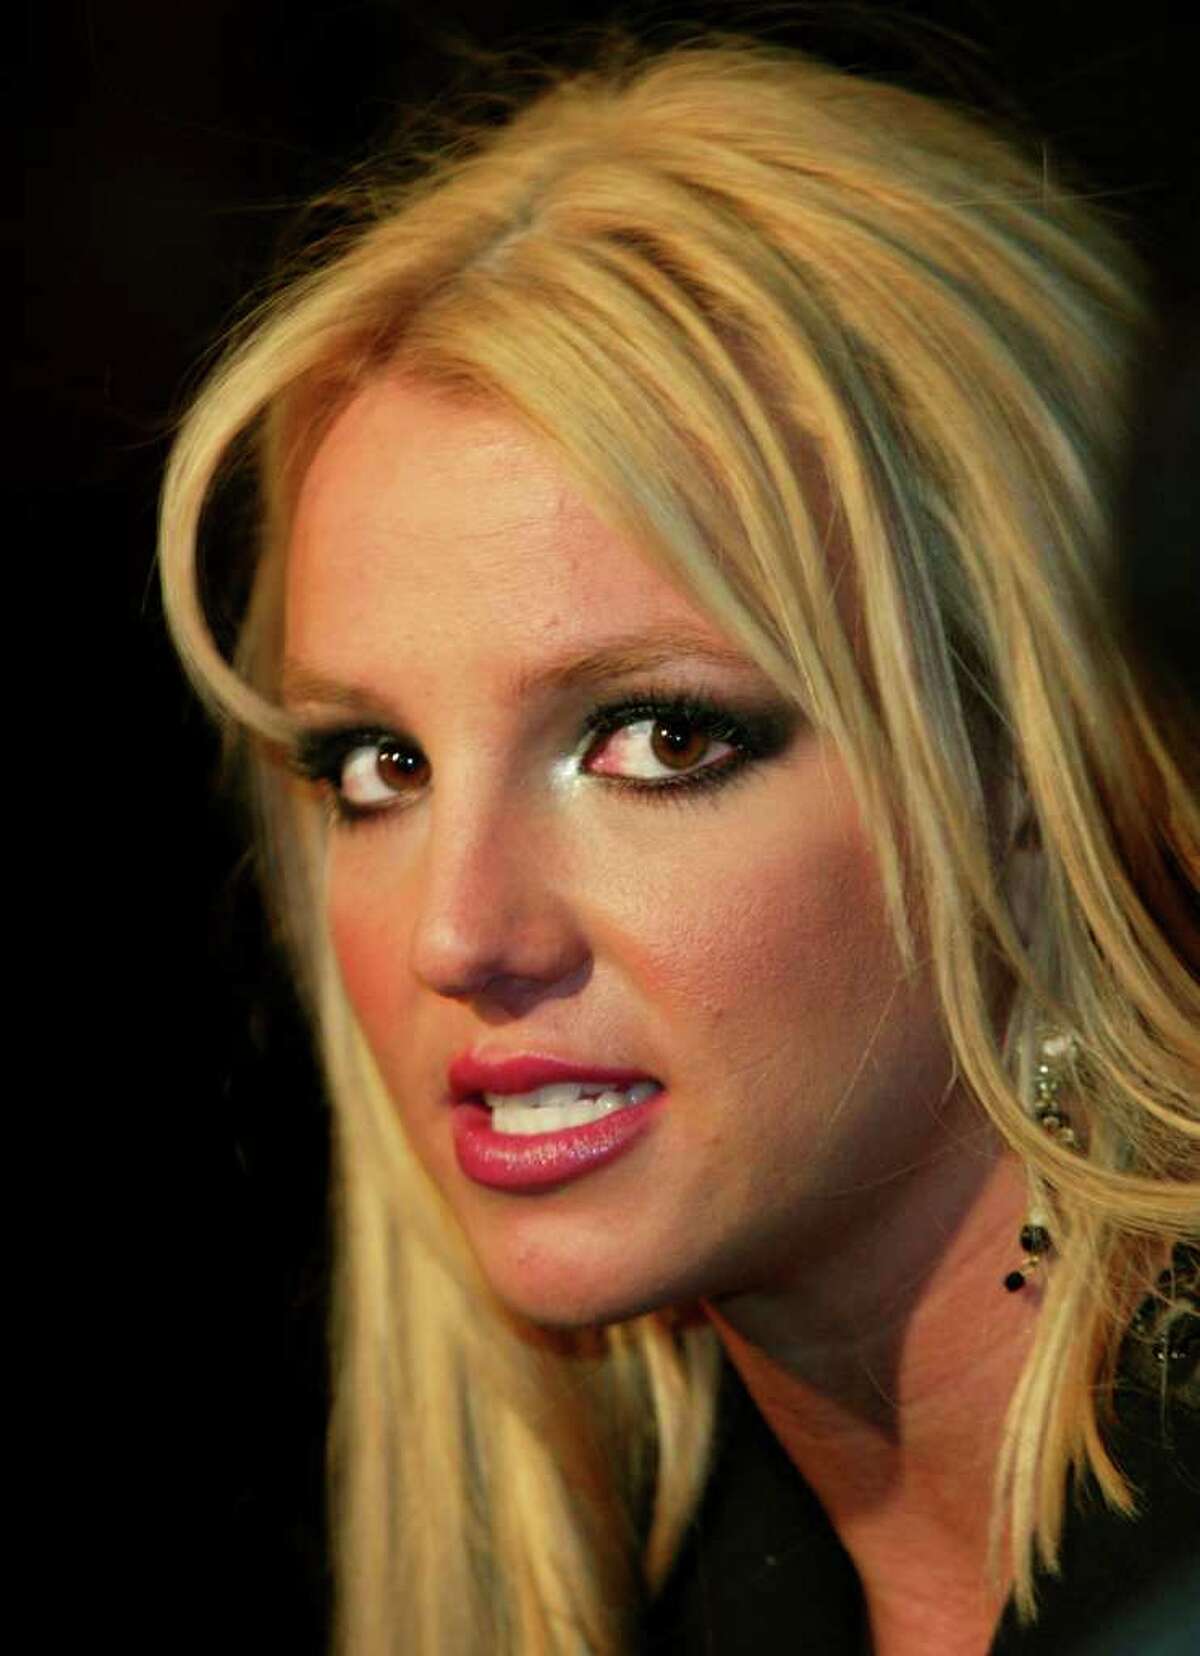 Review: Britney Spears' 'Femme Fatale' shows spark